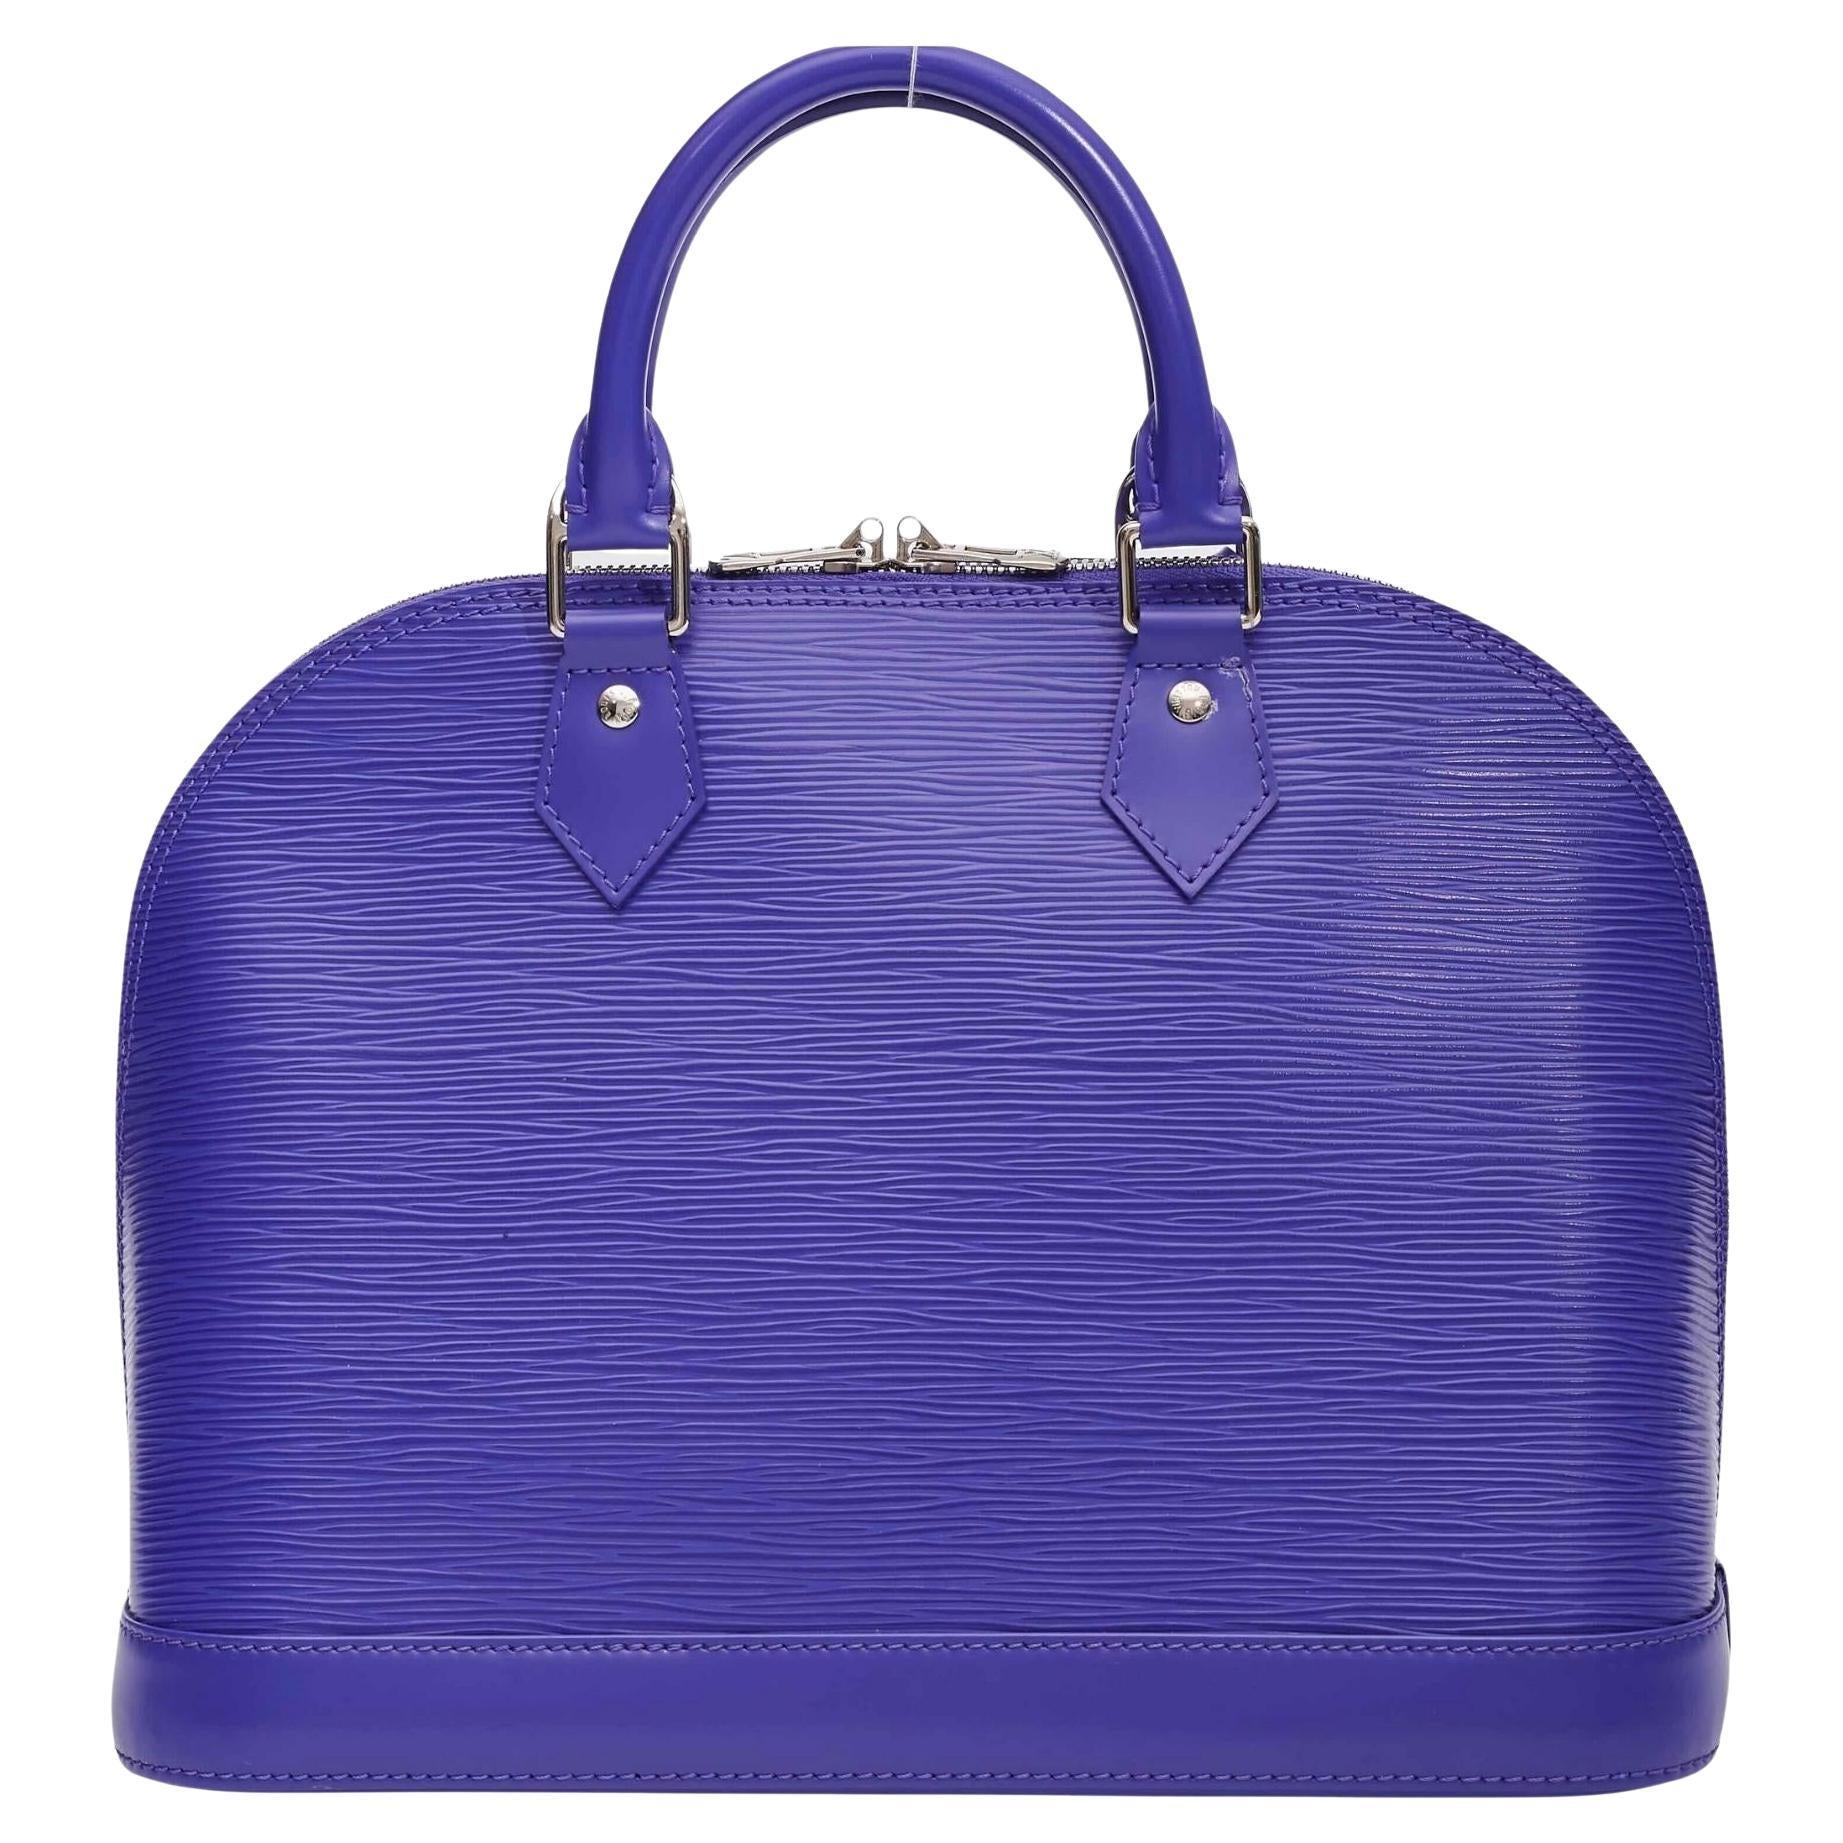 The Alma PM features an epi leather body, rolled handles, a top zip closure, and an interior slip pocket. It carries a A Condition Rating

Color: Purple
Material: Epi leather
Date code: FL3152
Year: 2012
Measures: Height 9” x Length 12” x Depth